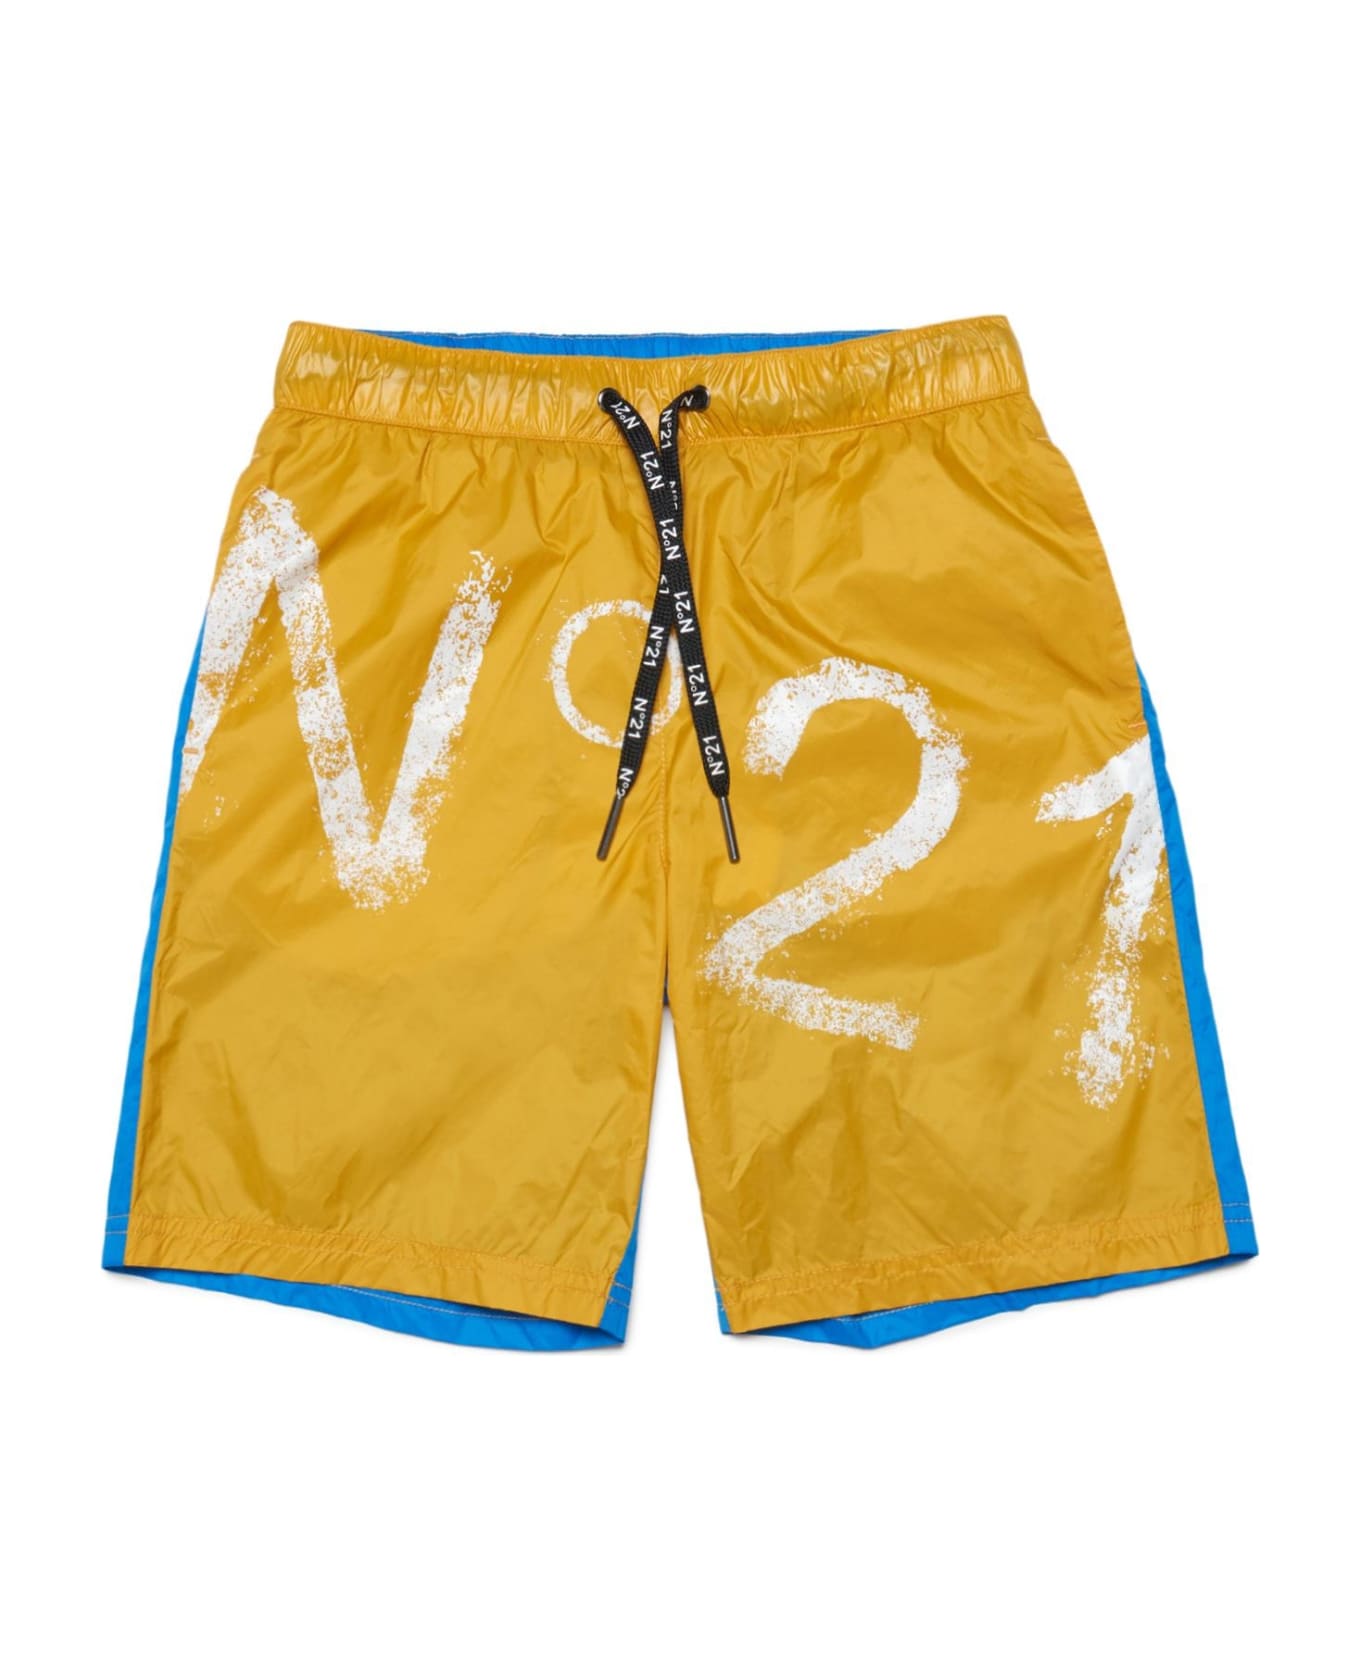 N.21 Swimsuit With Print - Yellow